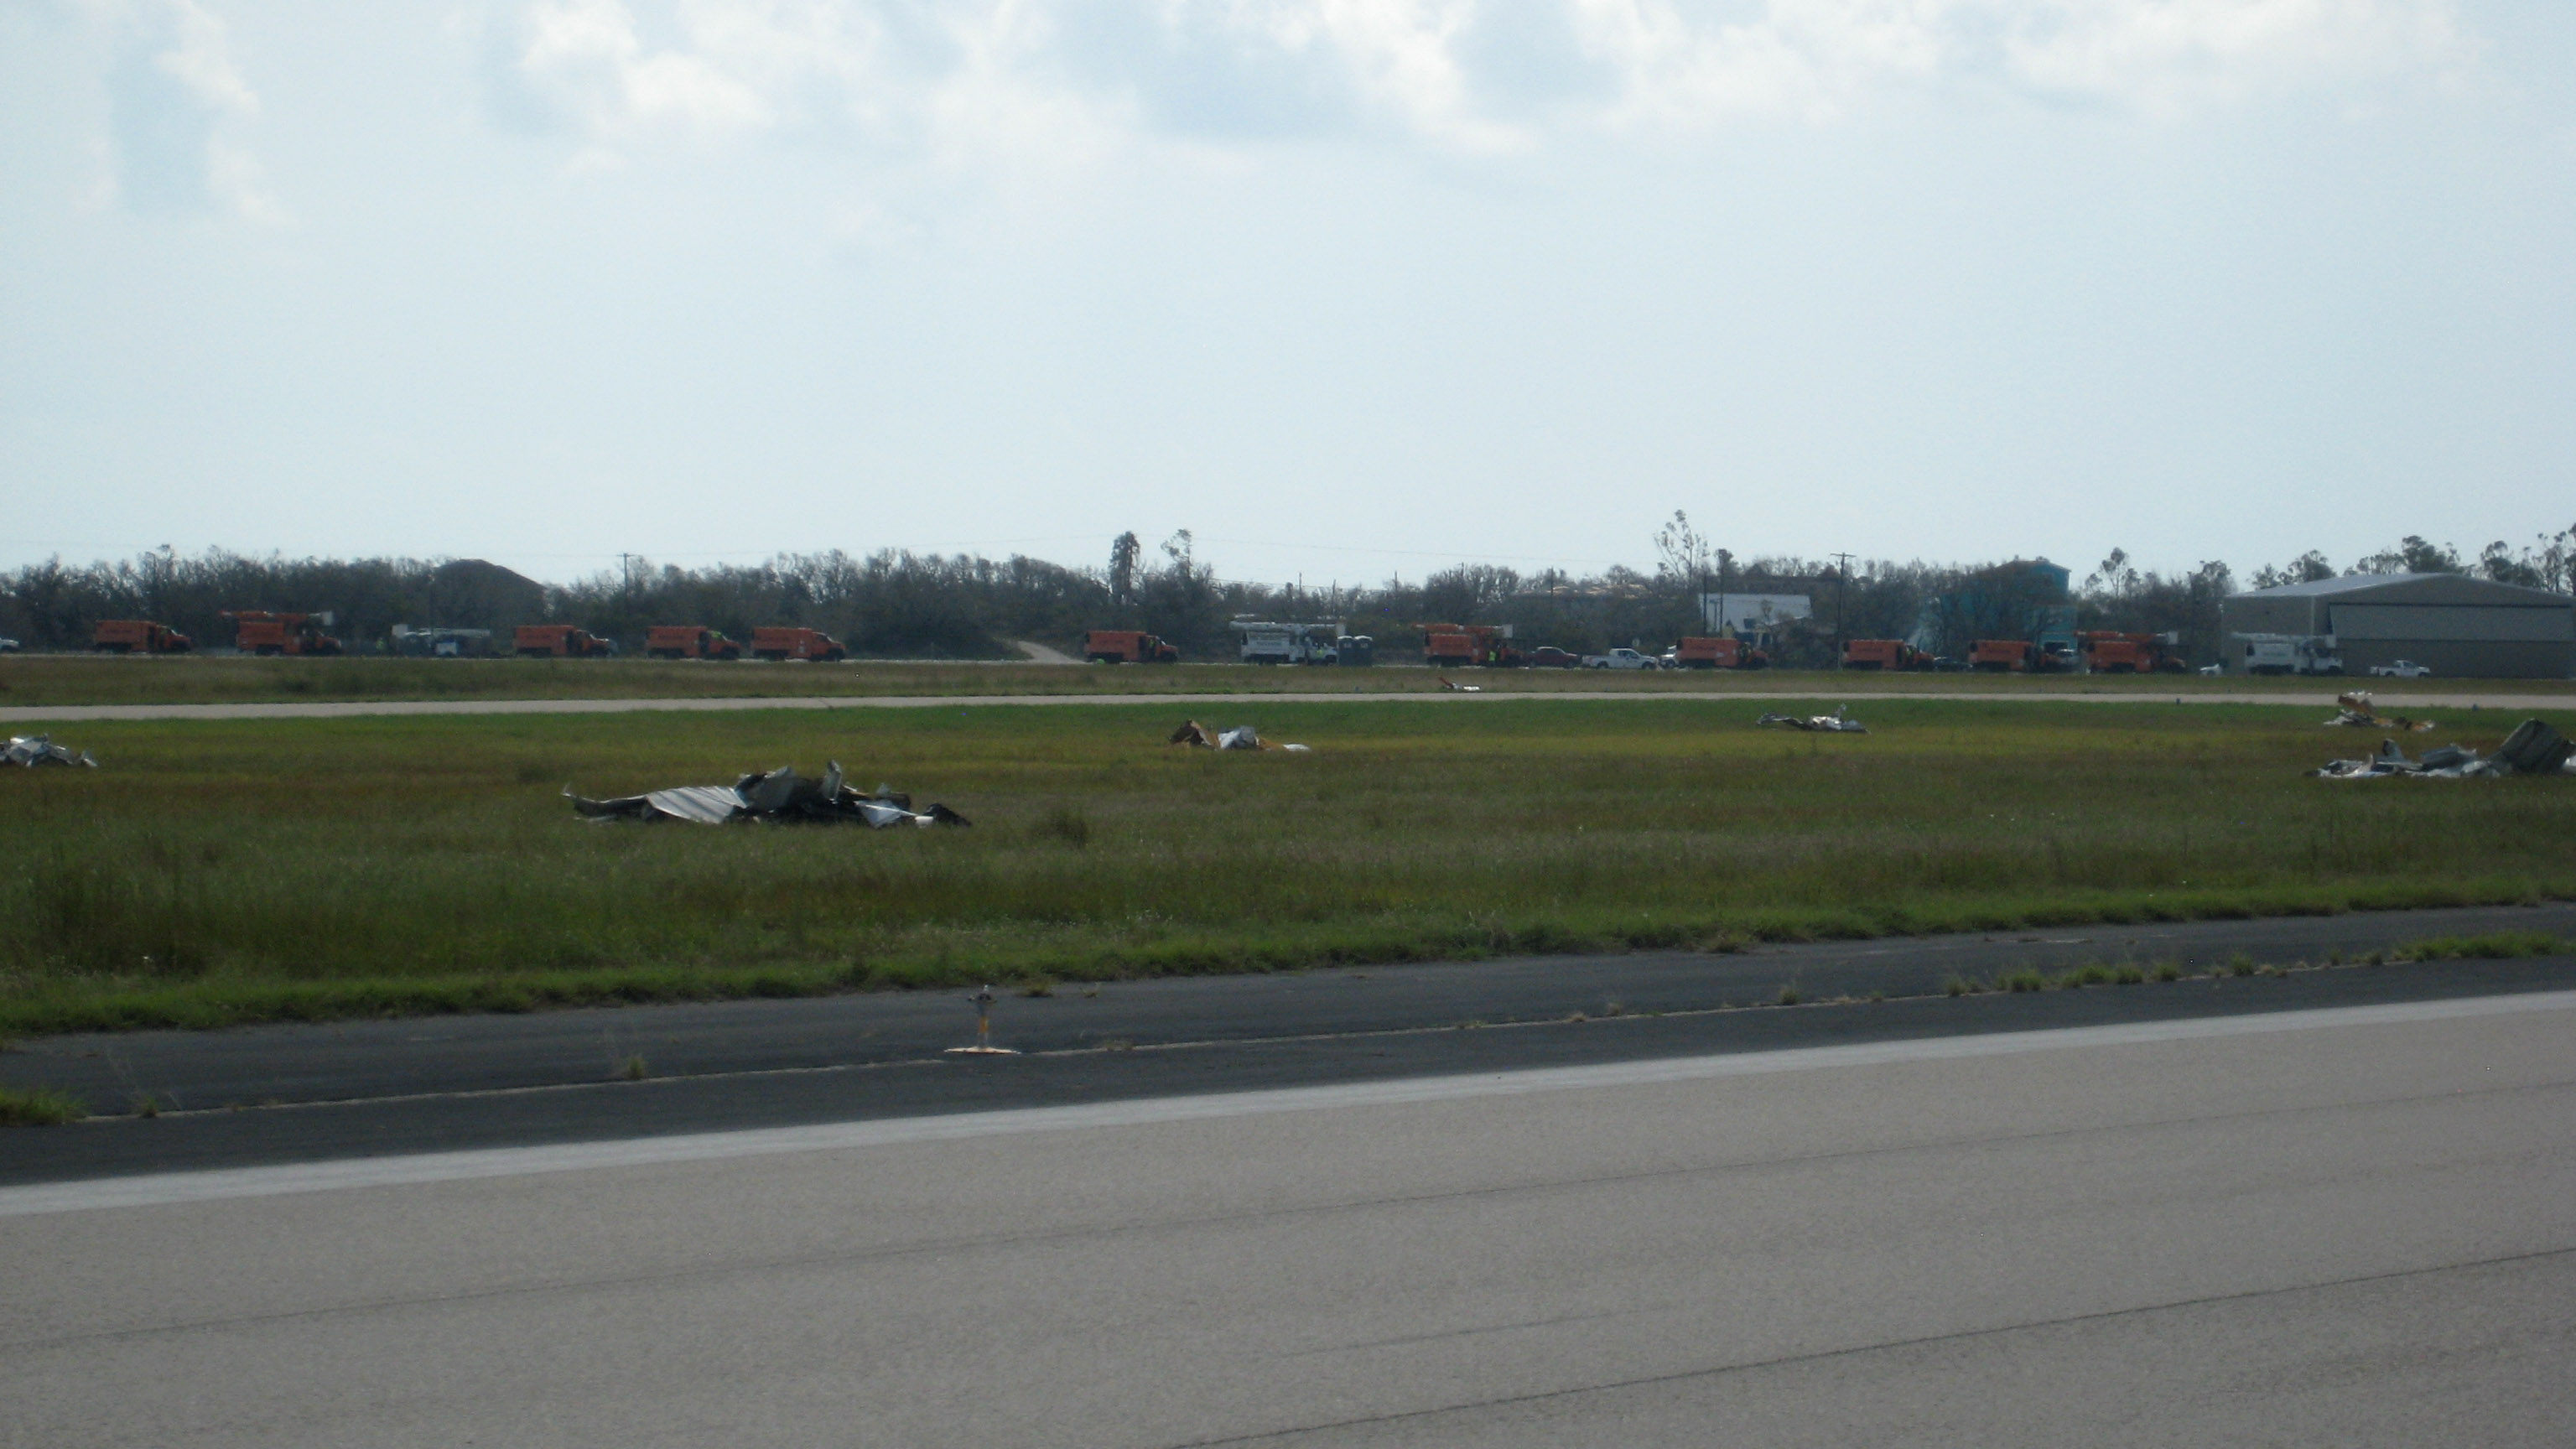 In Rockport, Texas, volunteers swept up piles of hangar debris. Orange FEMA trucks are in the background on the second runway. Photo by Larry Brown.